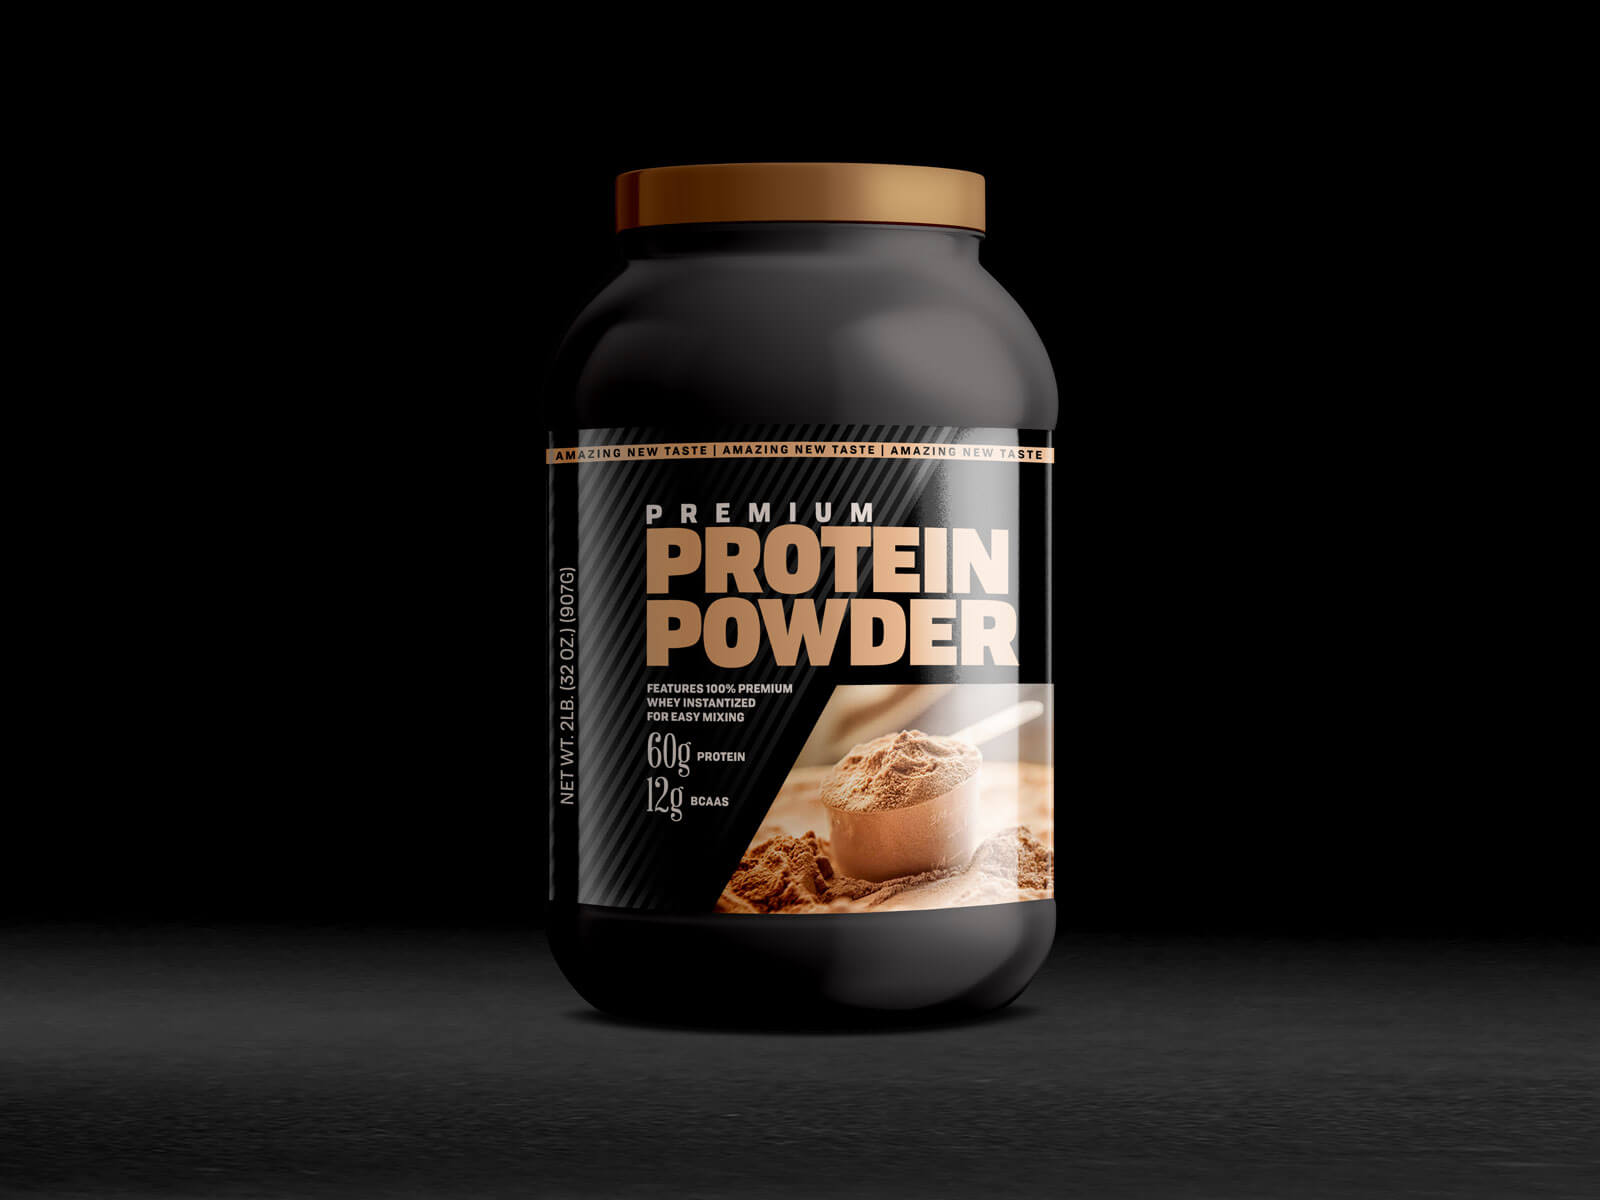 https://www.pacagemockup.com/wp-content/uploads/2021/02/Free-Protein-Powder-Bottle-Container-Mockup-PSD.jpg